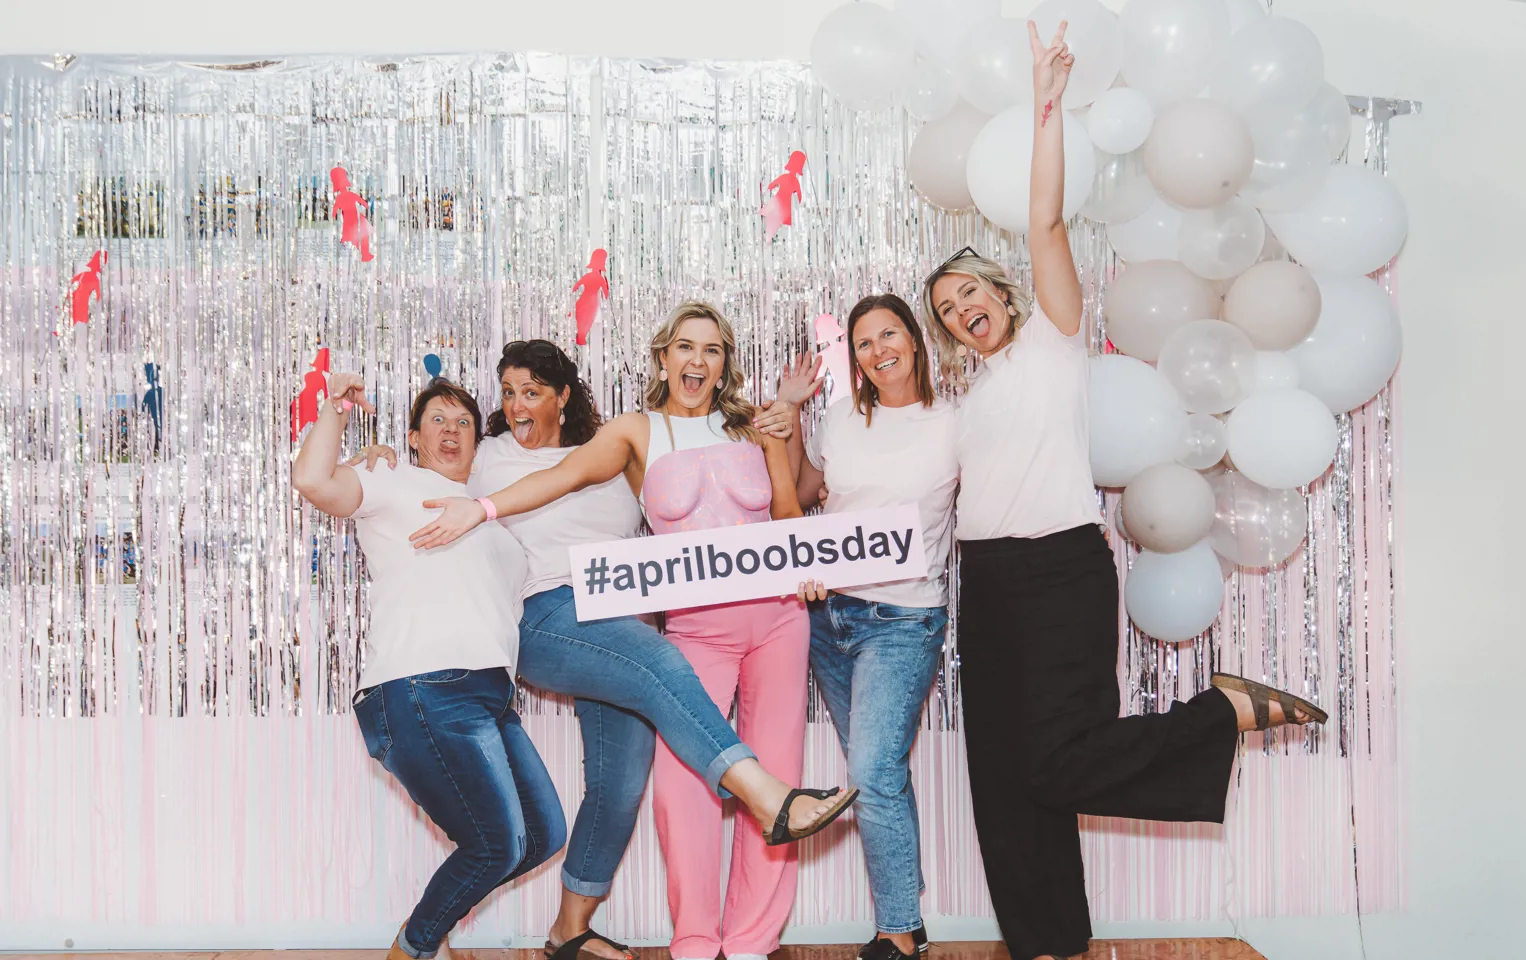 Group of ladies celebrating April boobs day